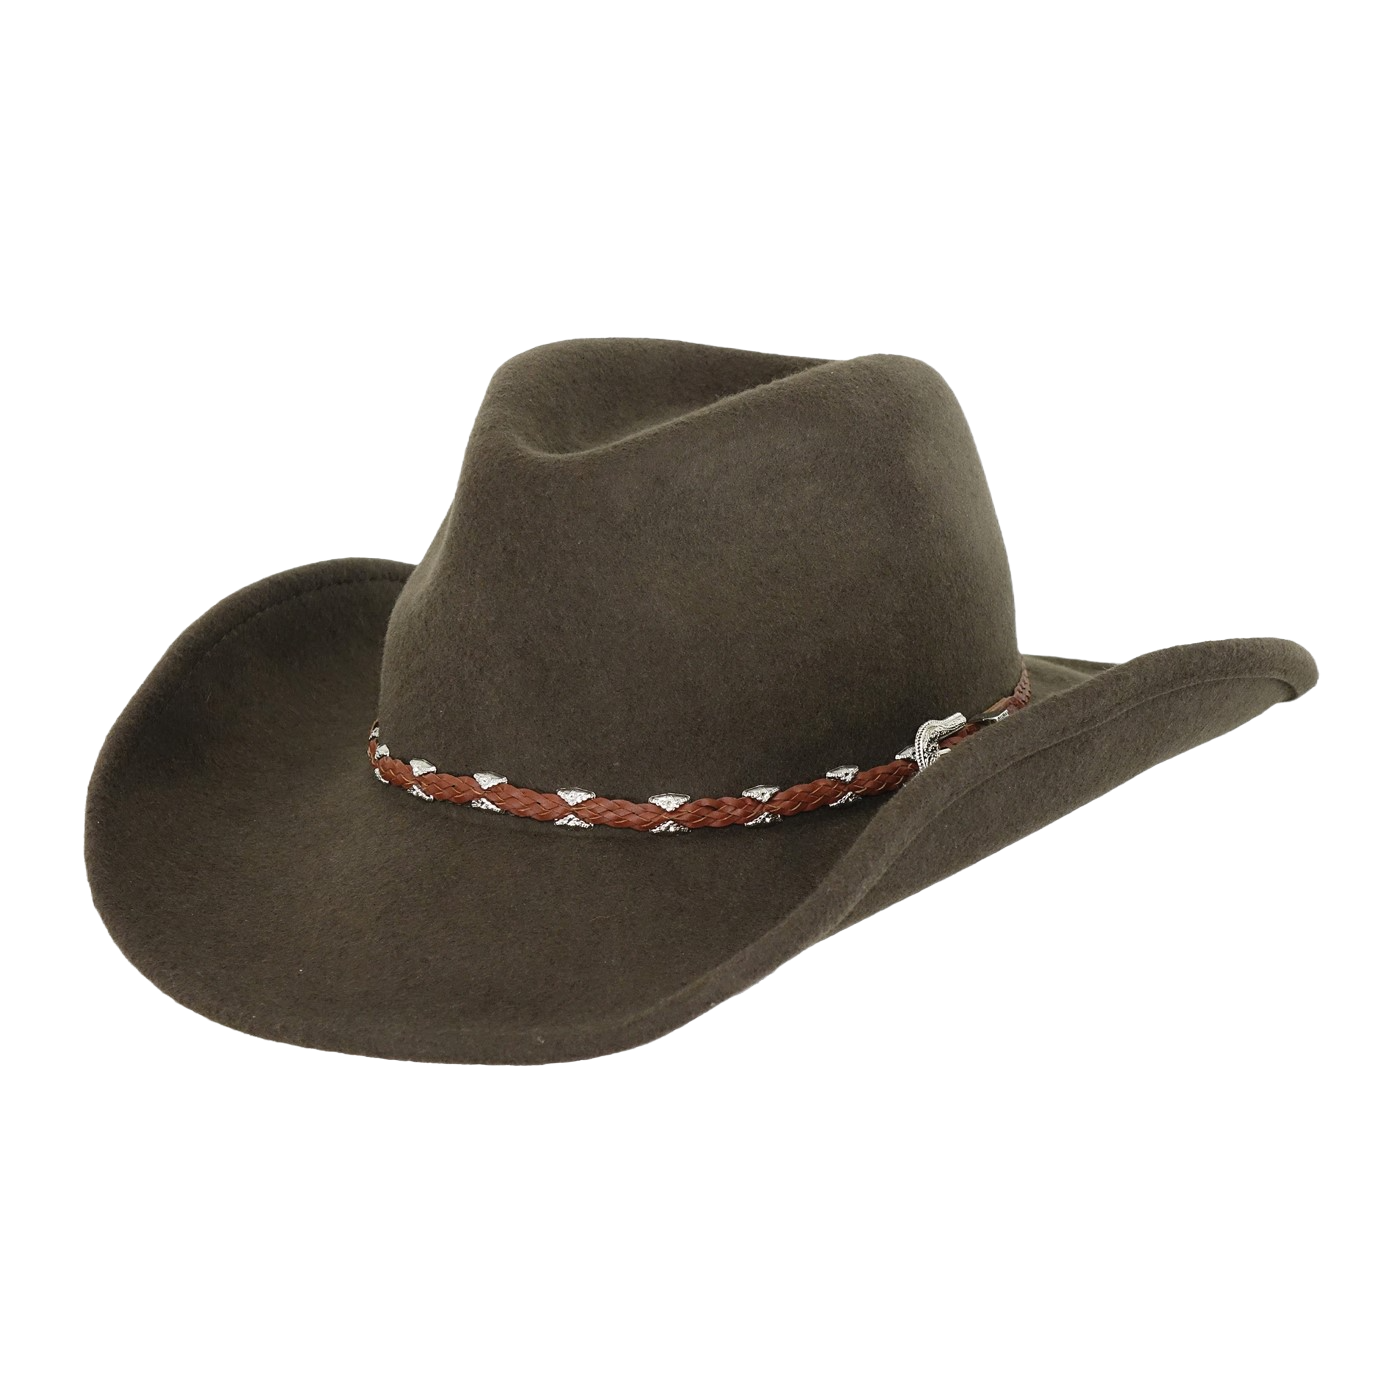 Outback Trading Company Unisex Wallaby Brown Crushable Hat 1320-BRN